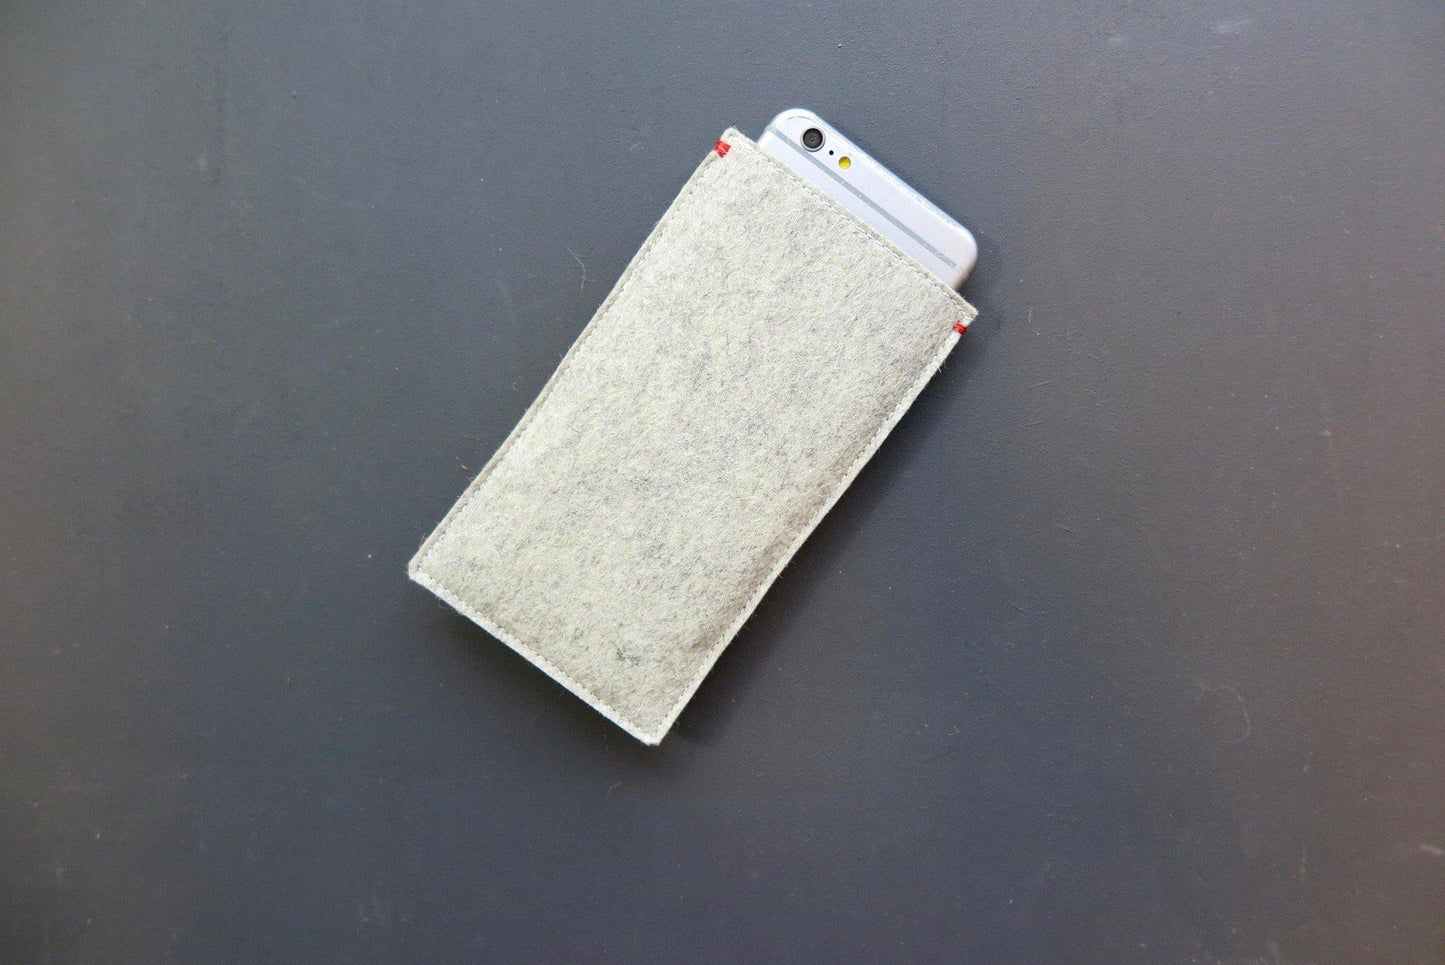 Minimalist style iPhone case made of natural materials 